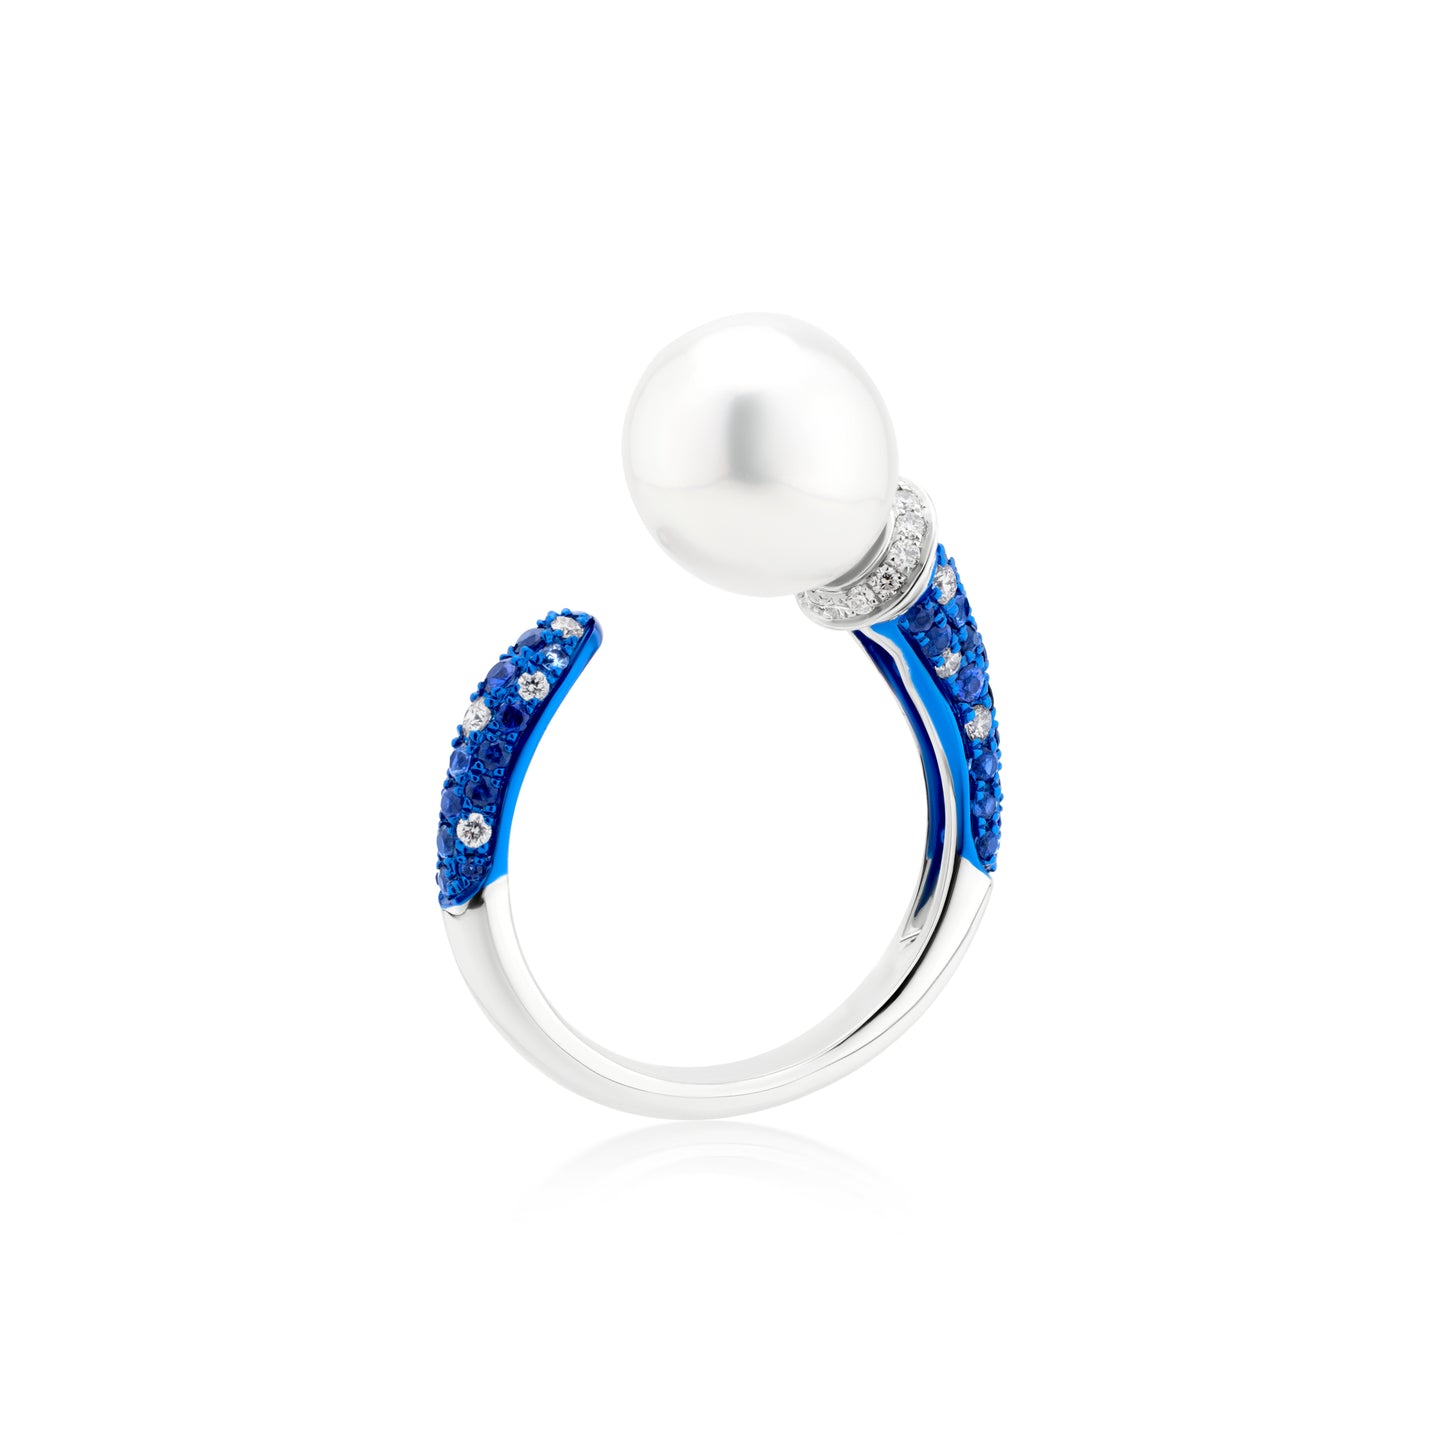 Ring With Sapphire,Pearl And Diamond In 18K White Gold And Blue Rhodium